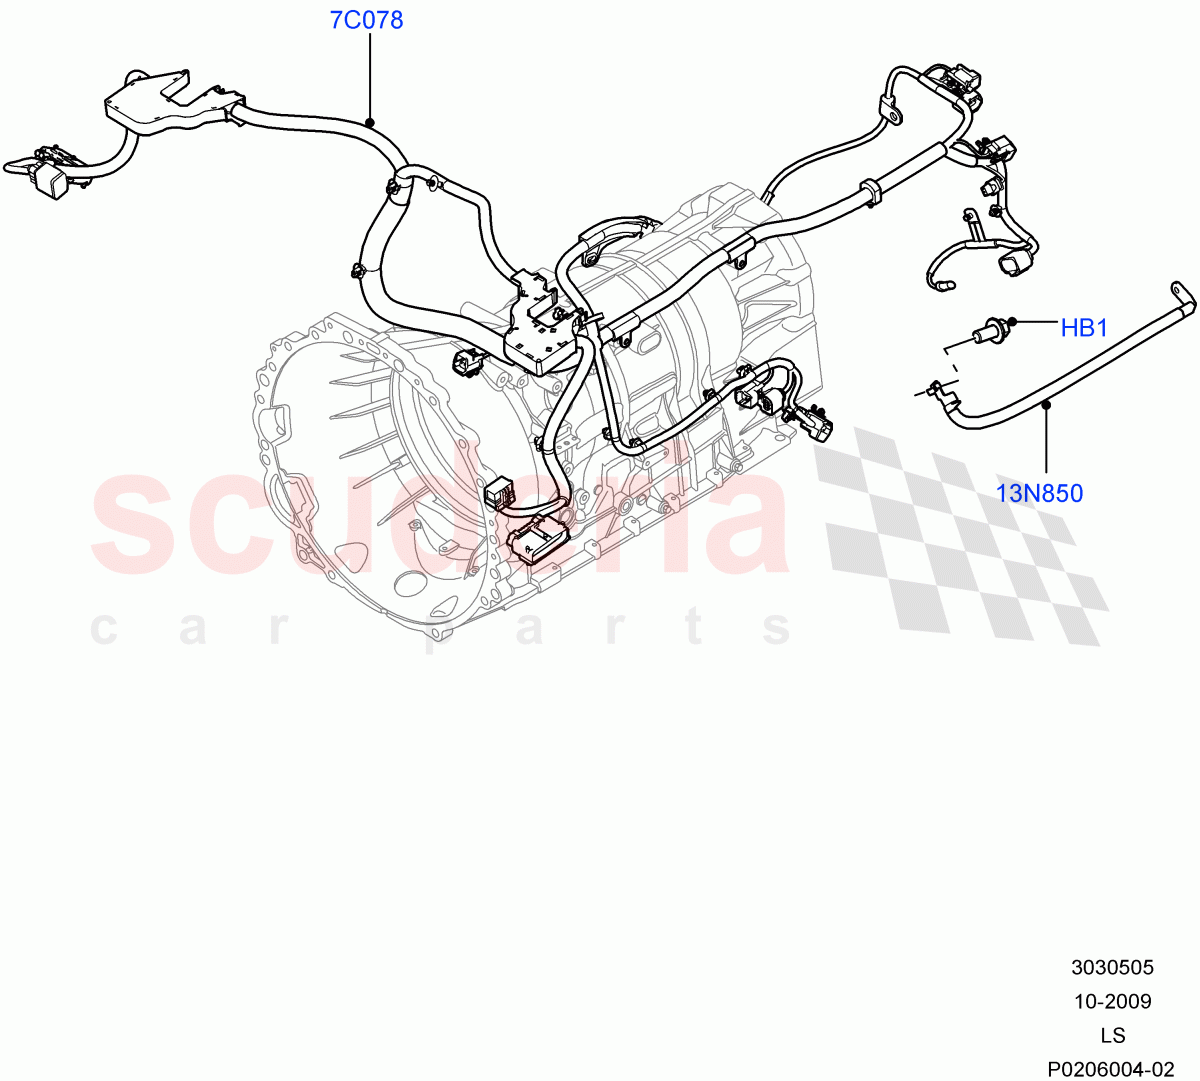 Electrical Wiring - Engine And Dash(Case Assy / Transmission)((V)FROMAA000001) of Land Rover Land Rover Discovery 4 (2010-2016) [2.7 Diesel V6]